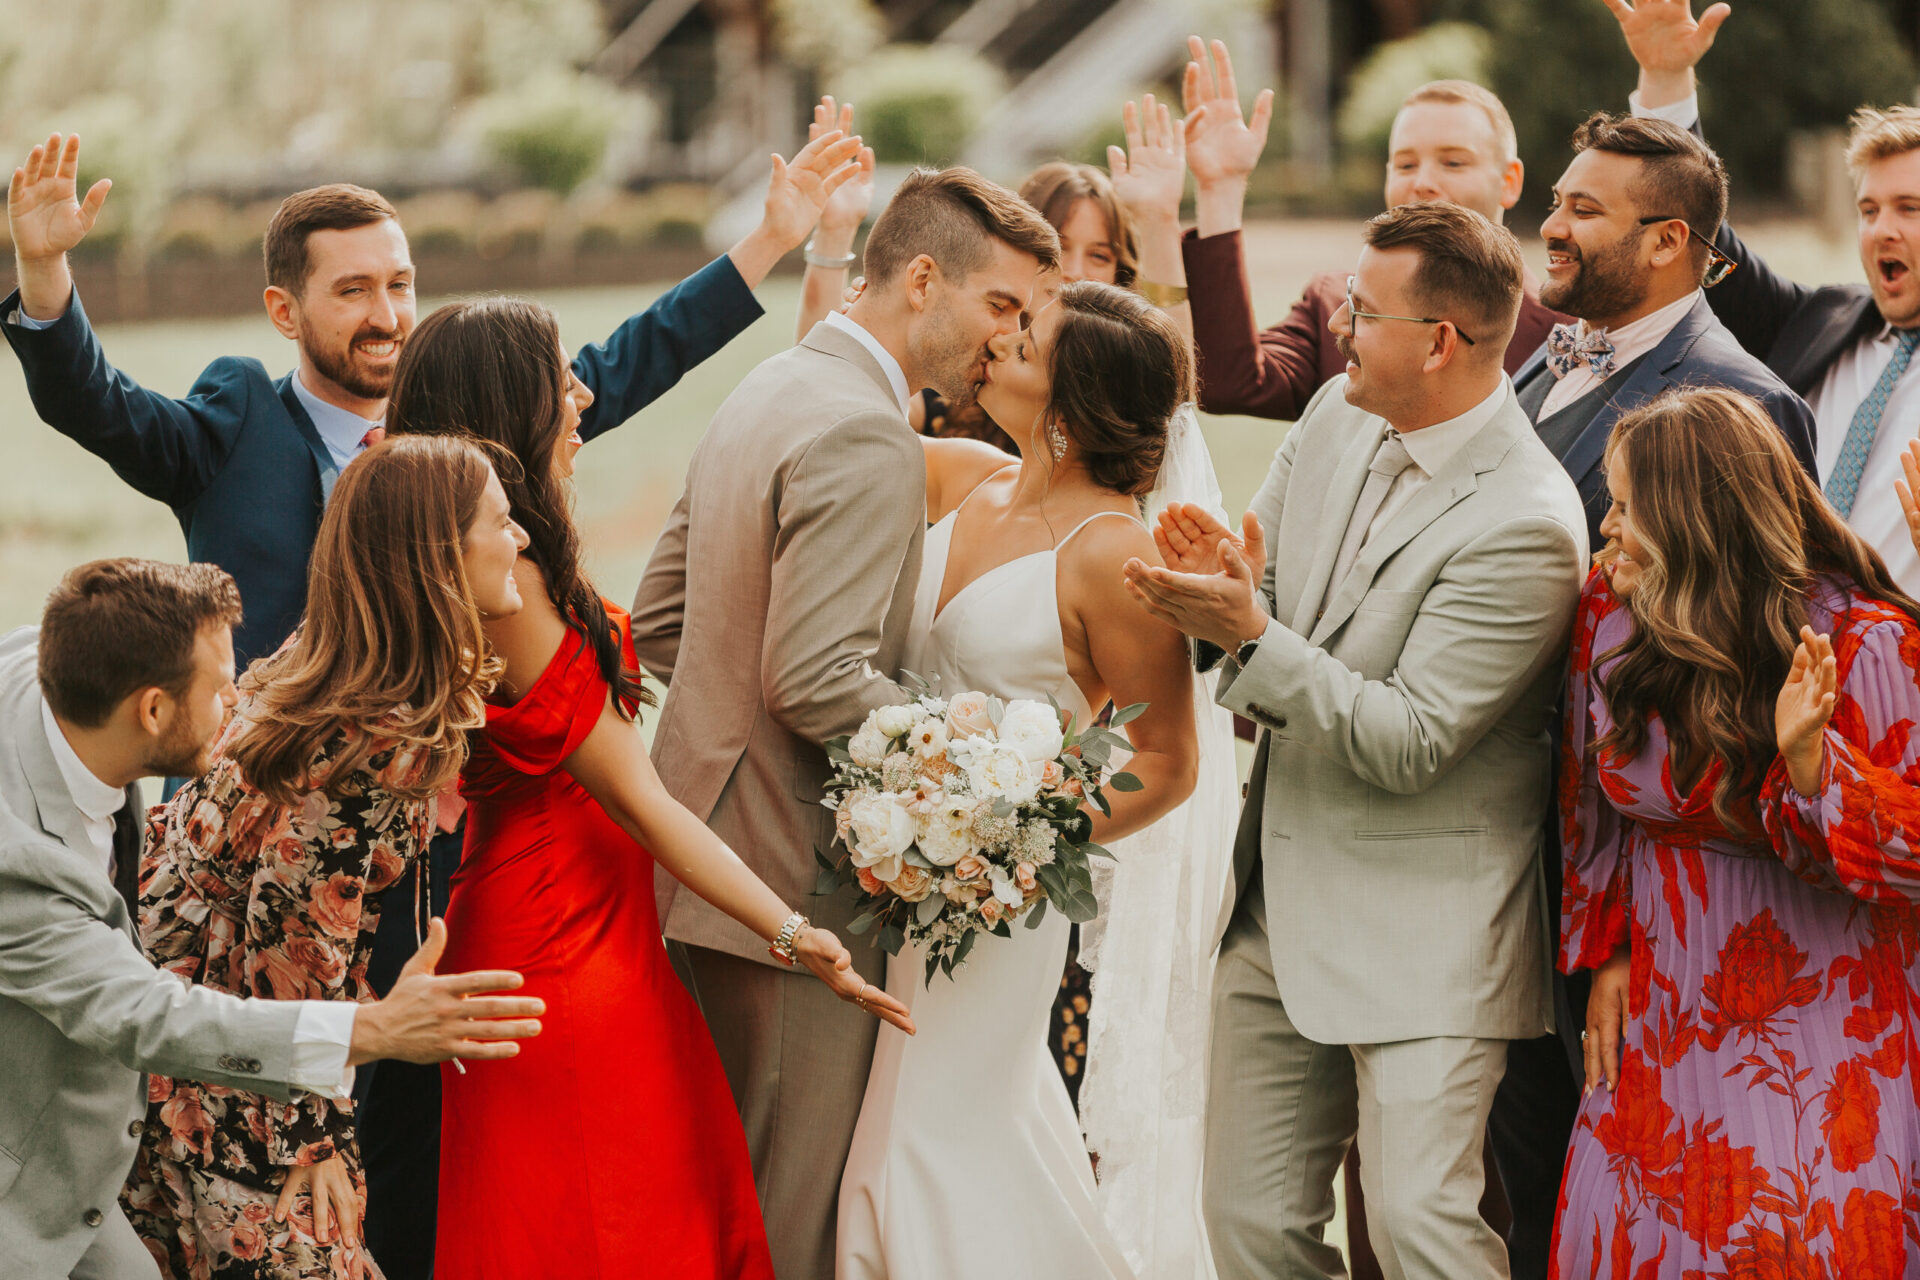 Zion Springs Real Wedding bride and groom kissing with bridesmaids and groomsmen chearing on